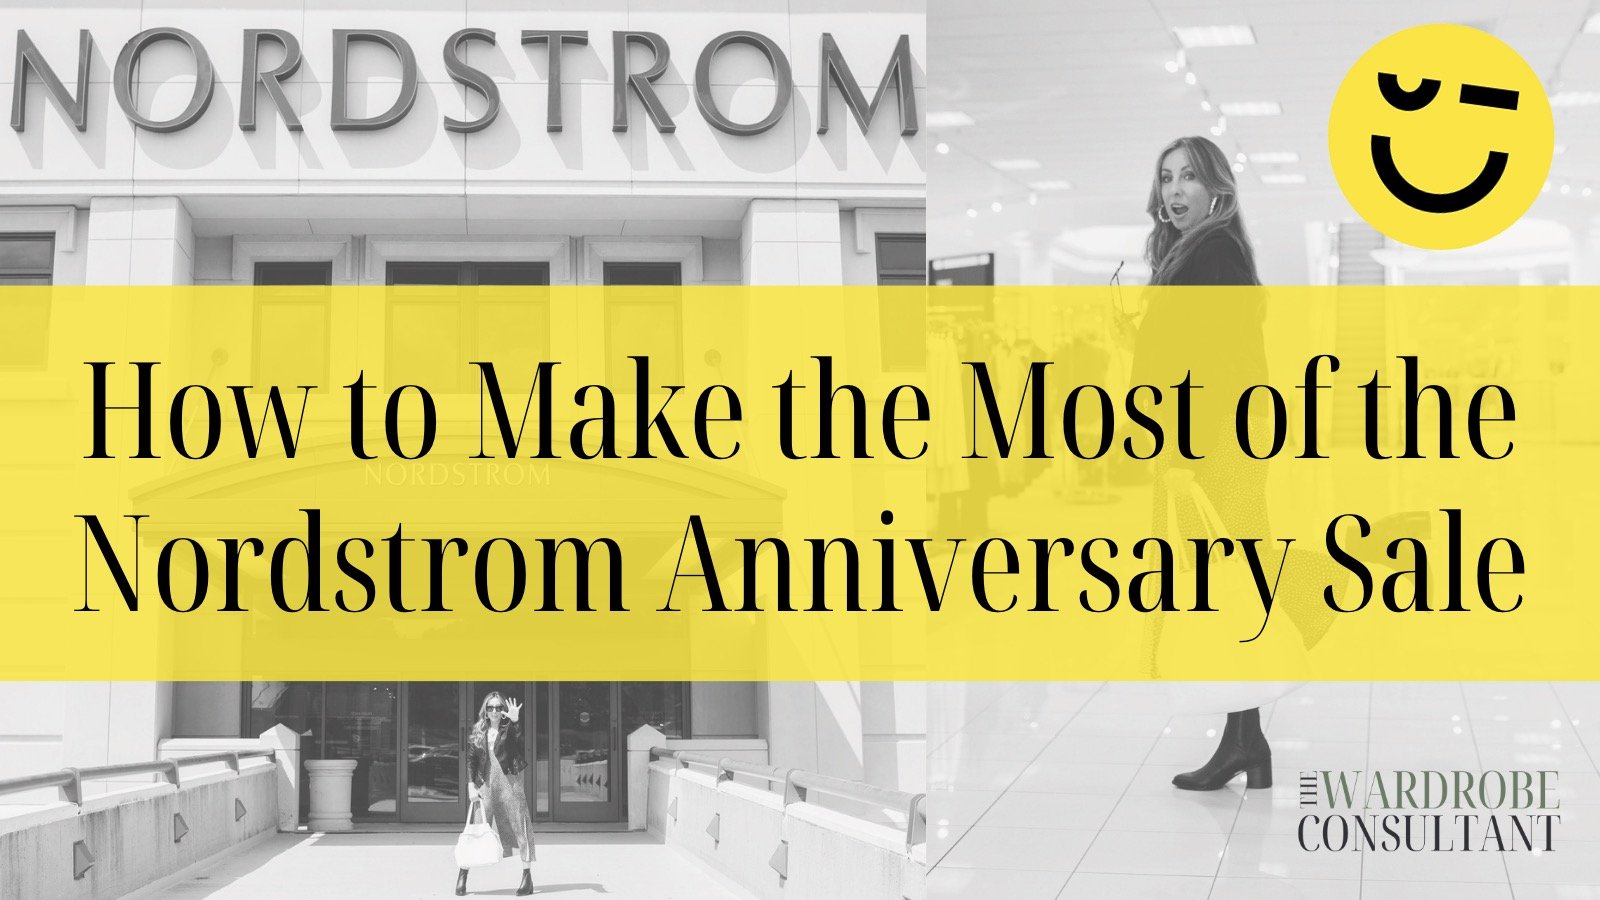 What It's Really Like to Work at Nordstrom